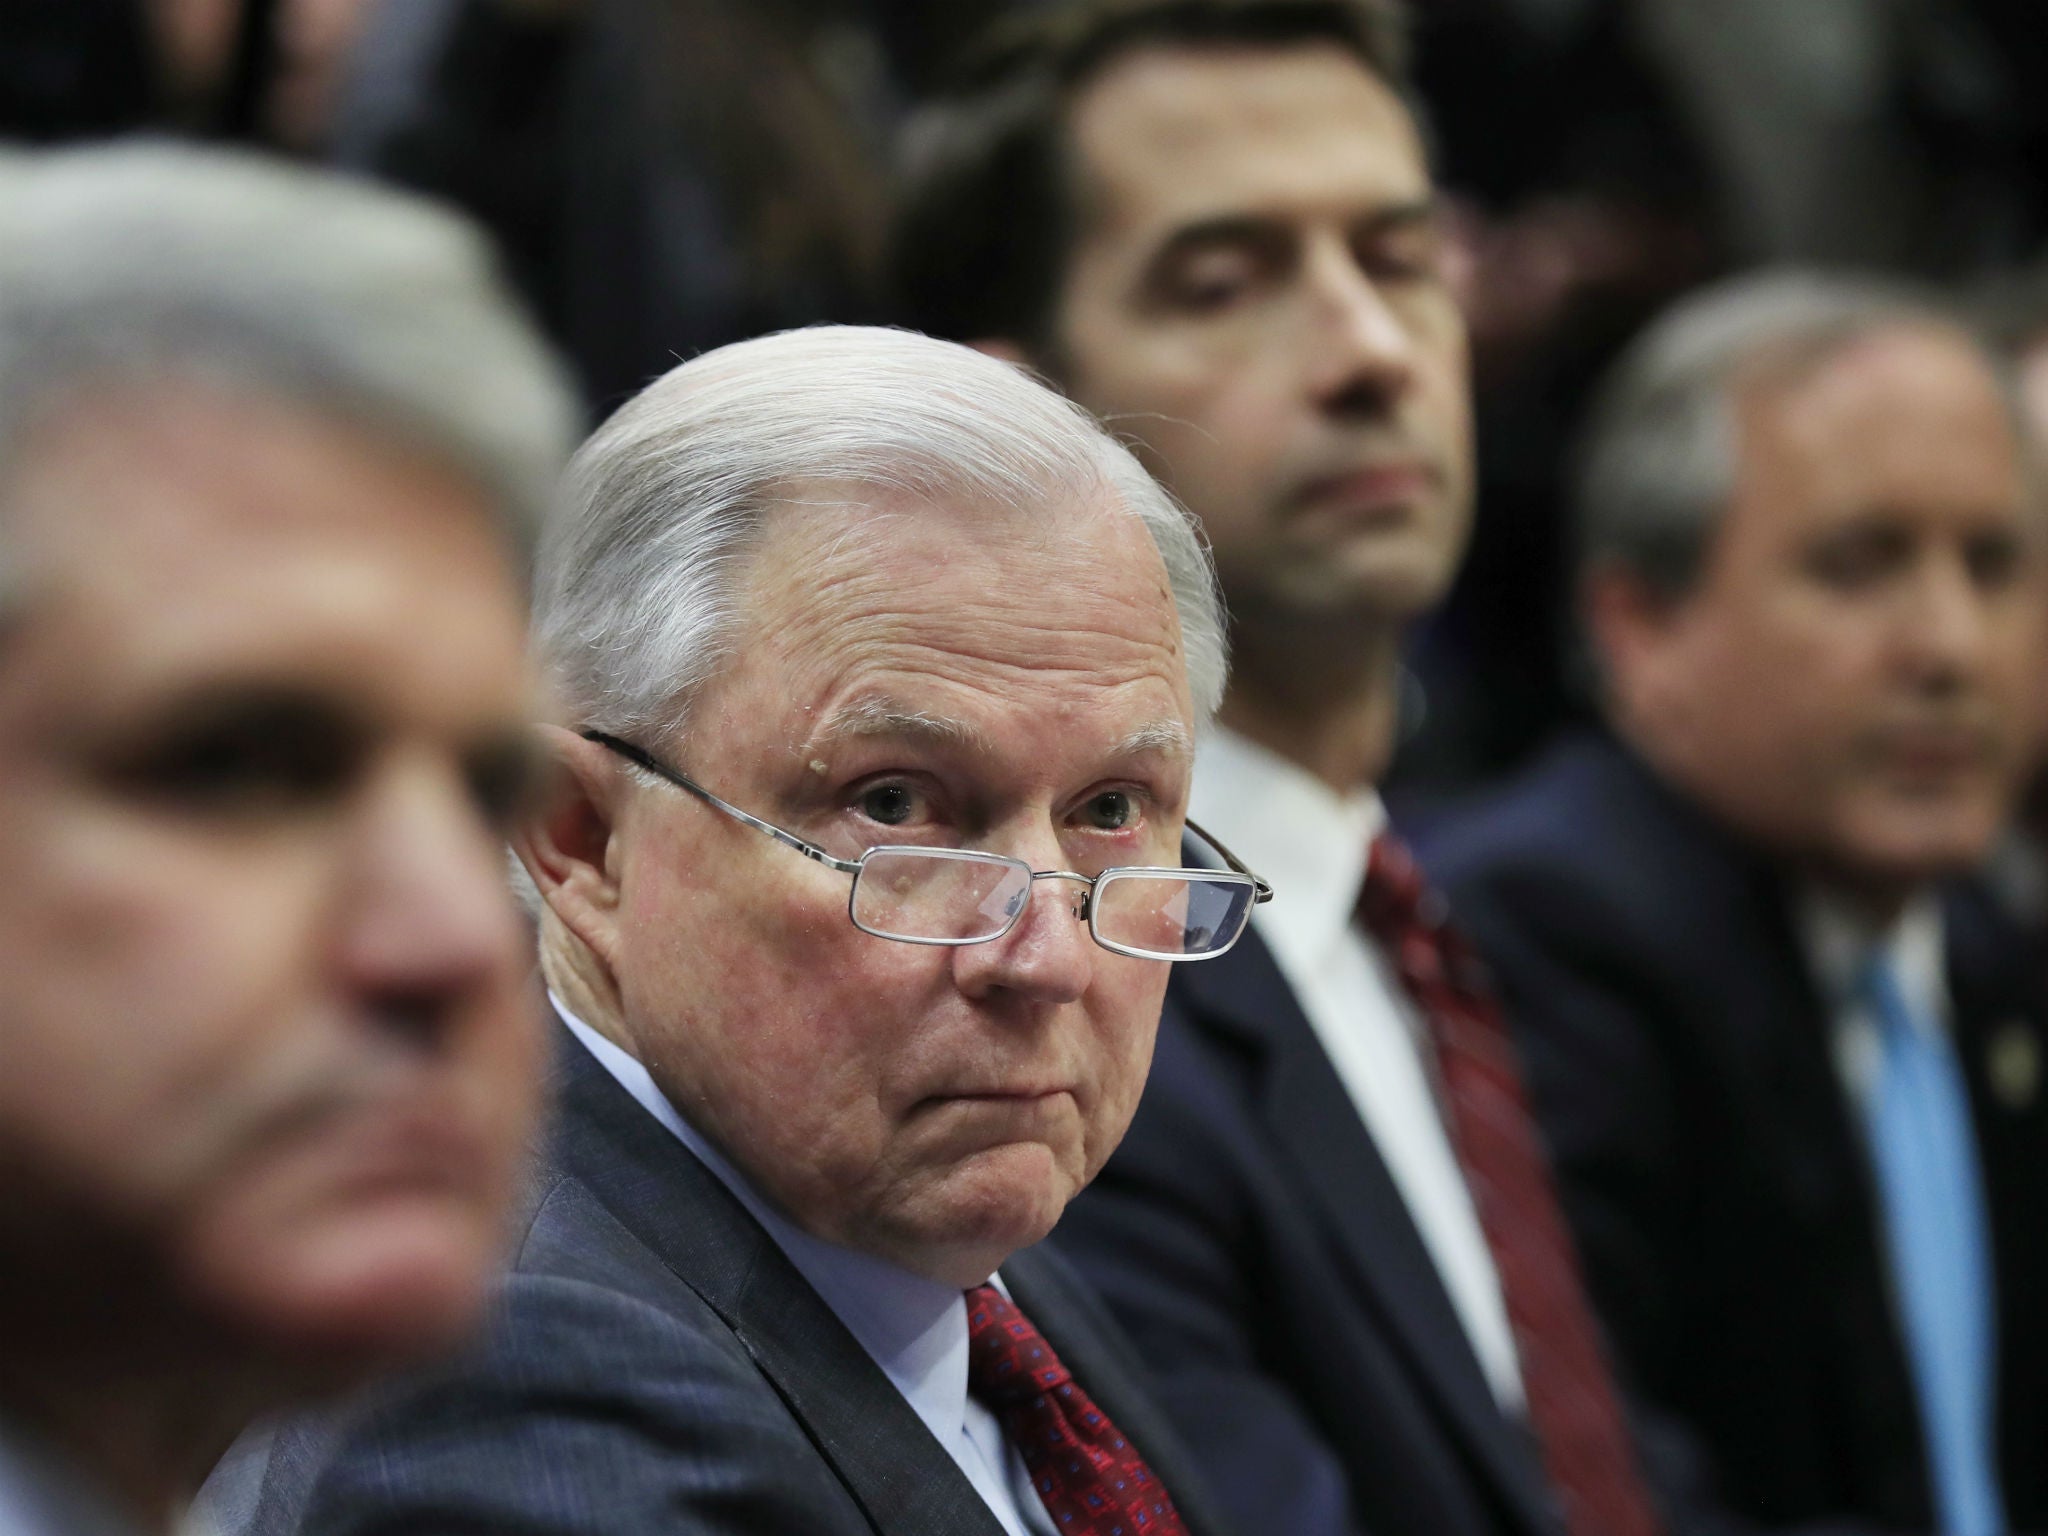 Jeff Sessions did not rule out the possibility that a deputy could recommend appointing a special counsel